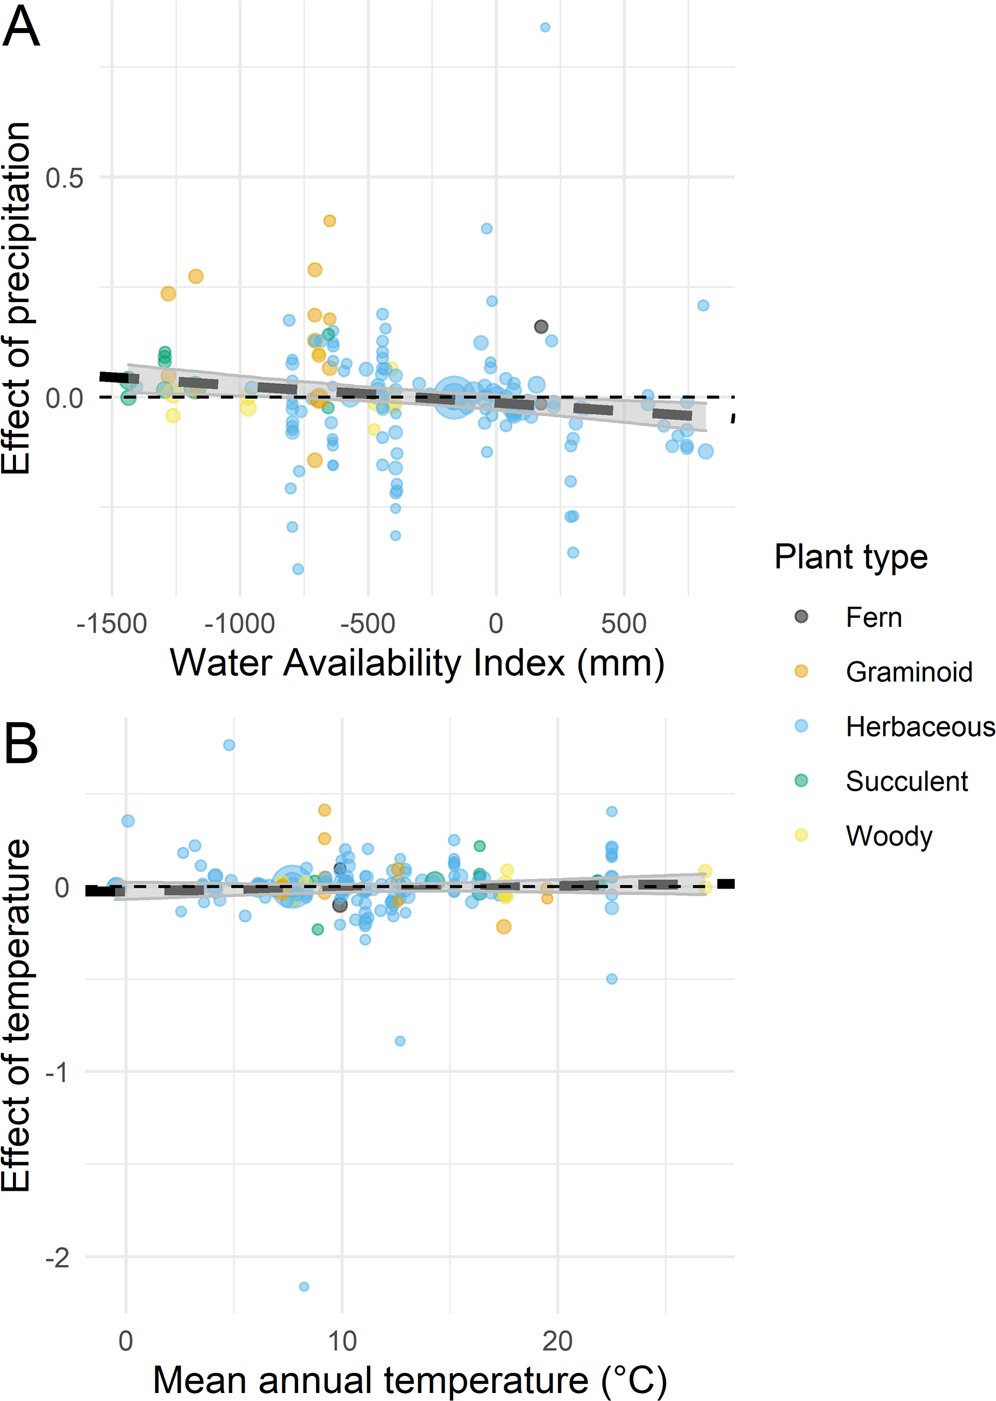 Herbaceous perennial plants with short generation time have stronger  responses to climate anomalies than those with longer generation time |  Nature Communications